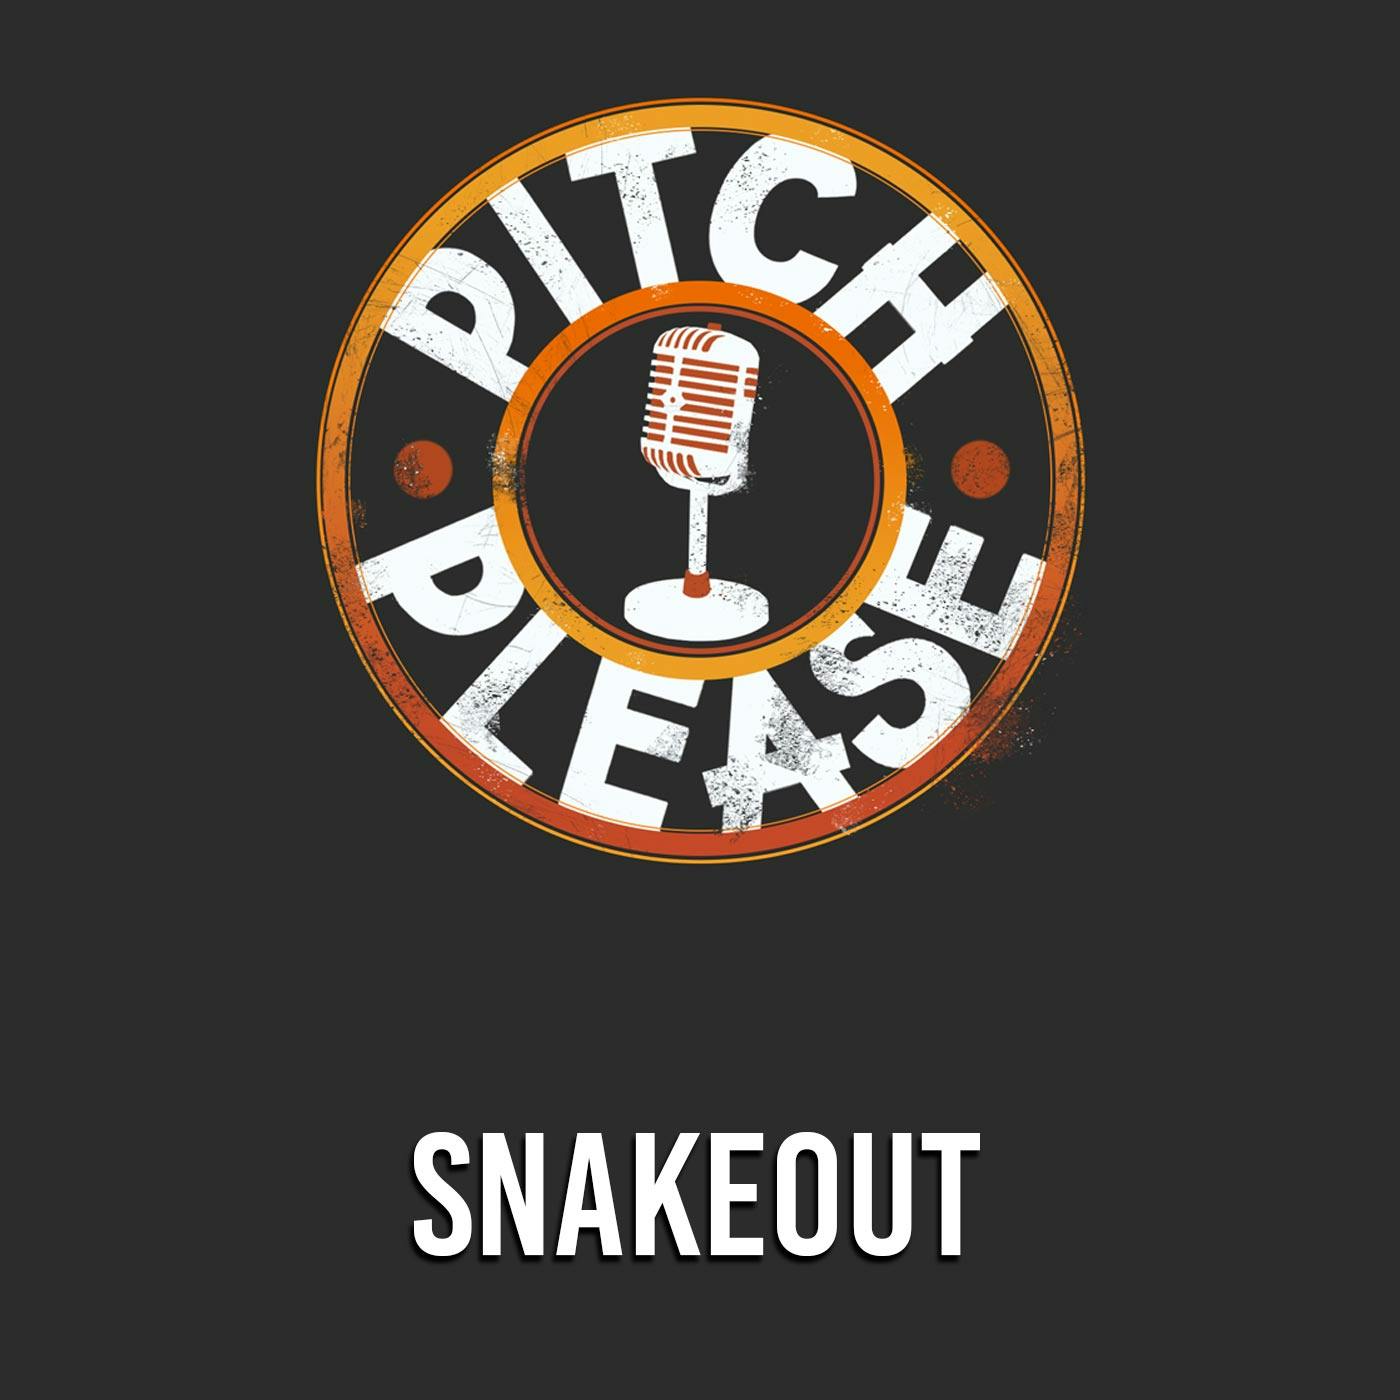 Snakeout - Pitch, Please